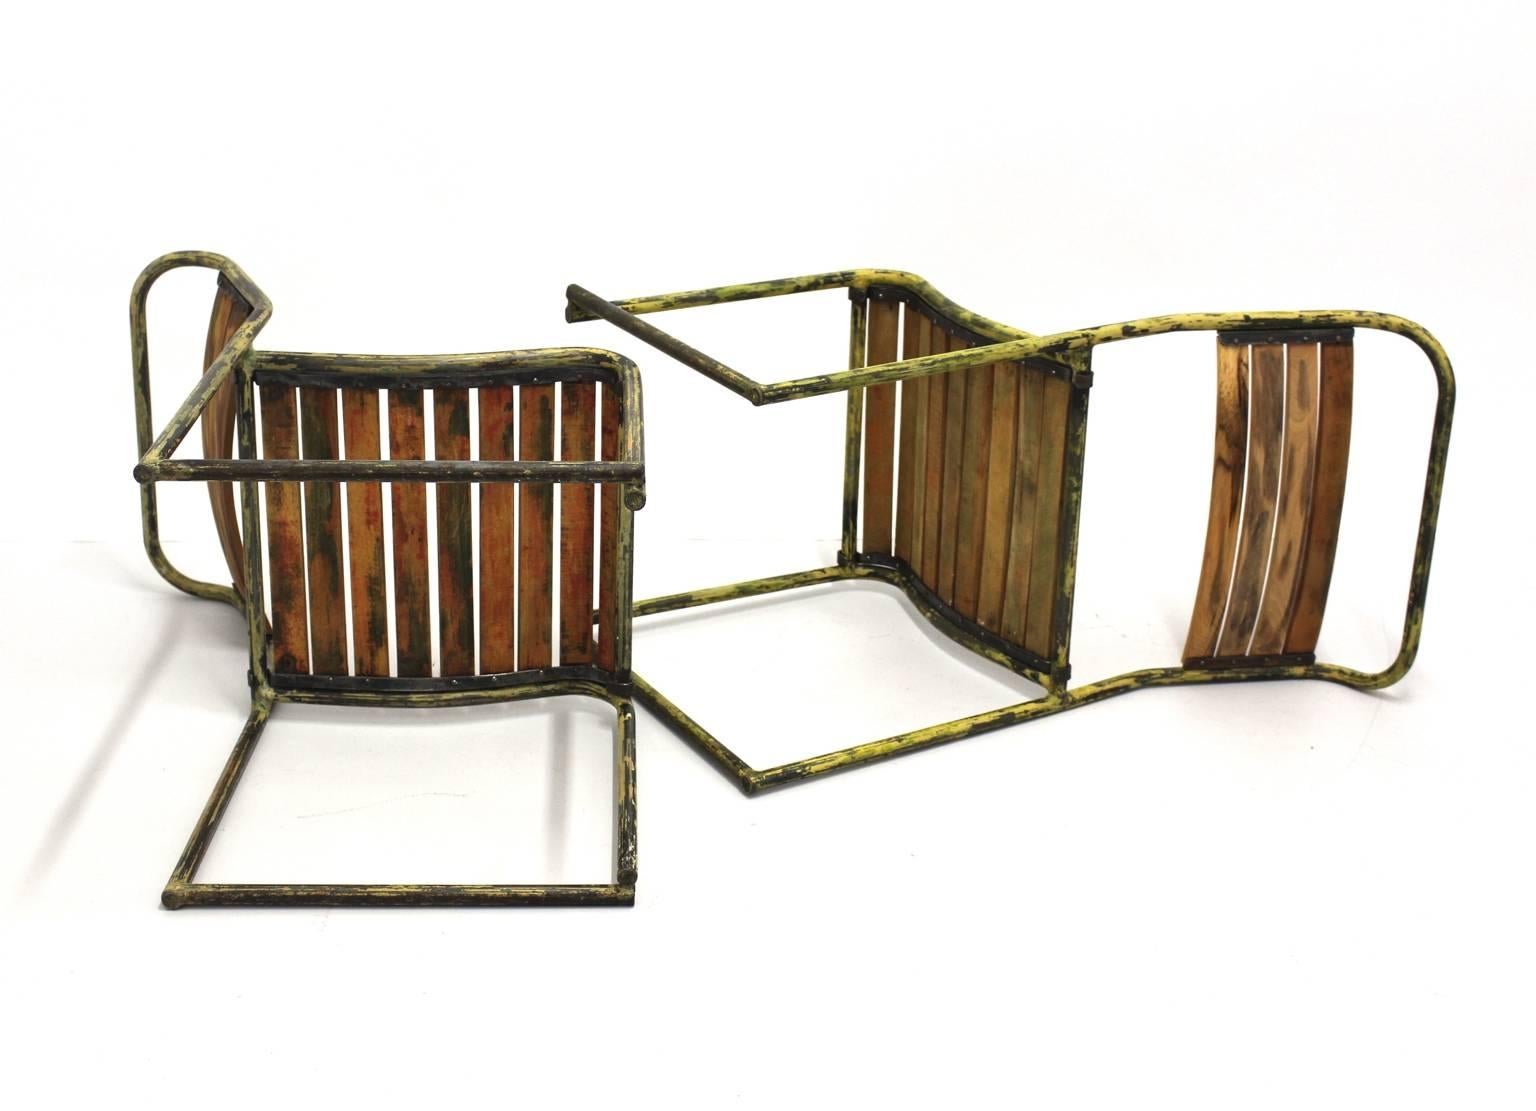 English Art Deco Vintage Steel Chairs RP6 by Bruno Pollak 1931-1932 PEL Ltd, England For Sale